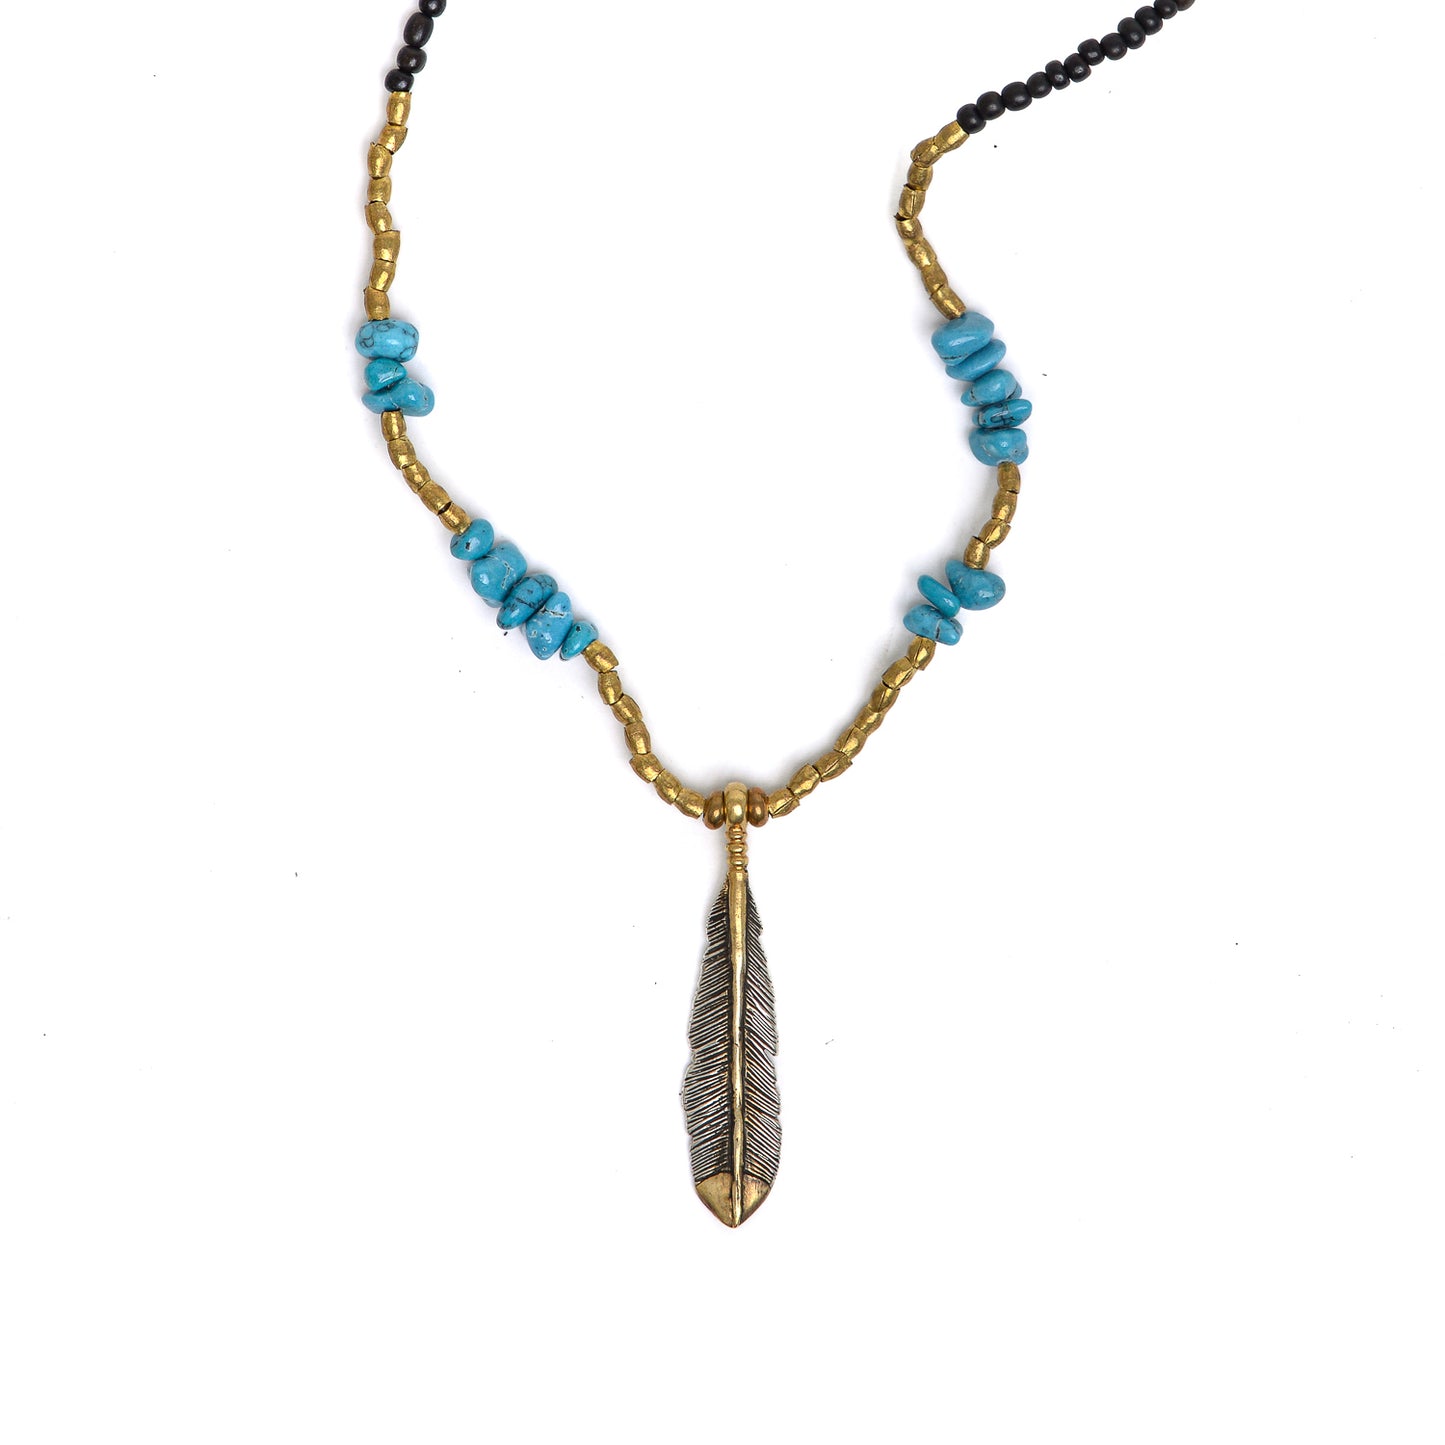 Horn + Feather Beads Necklace